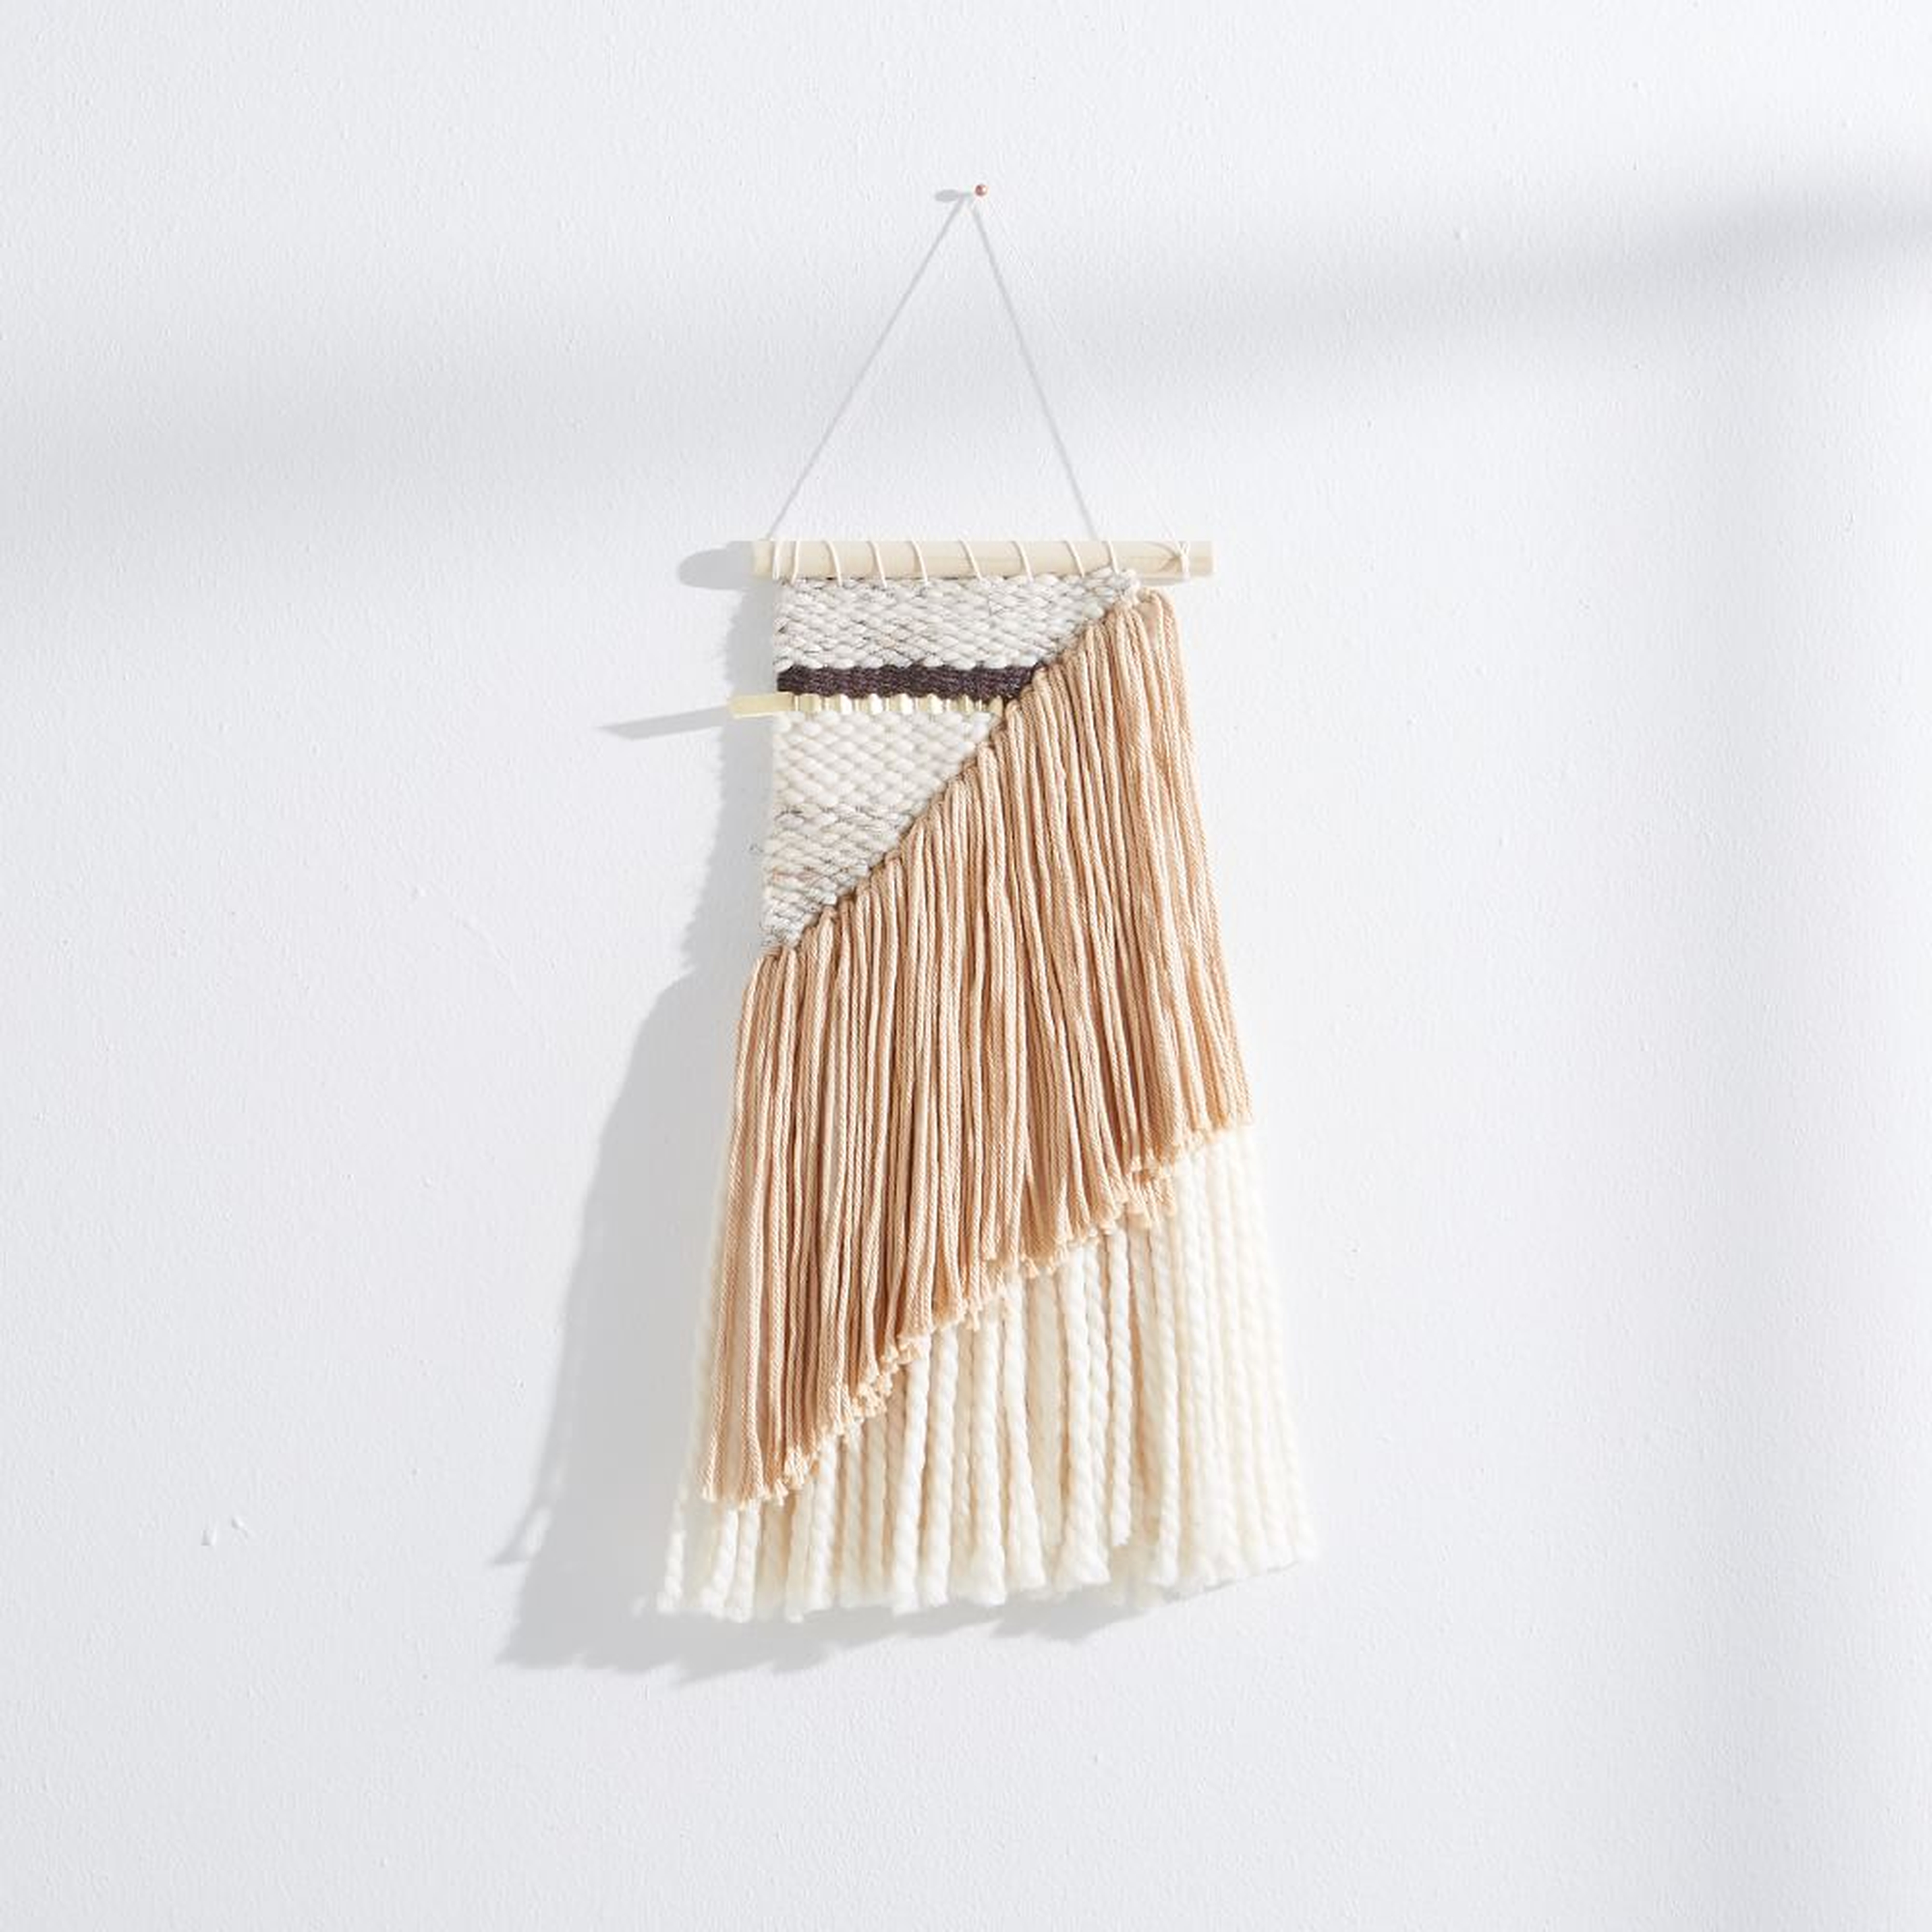 Sun Woven Wall Hanging, Small, Nude/Ivory/Charcoal/Gray - West Elm